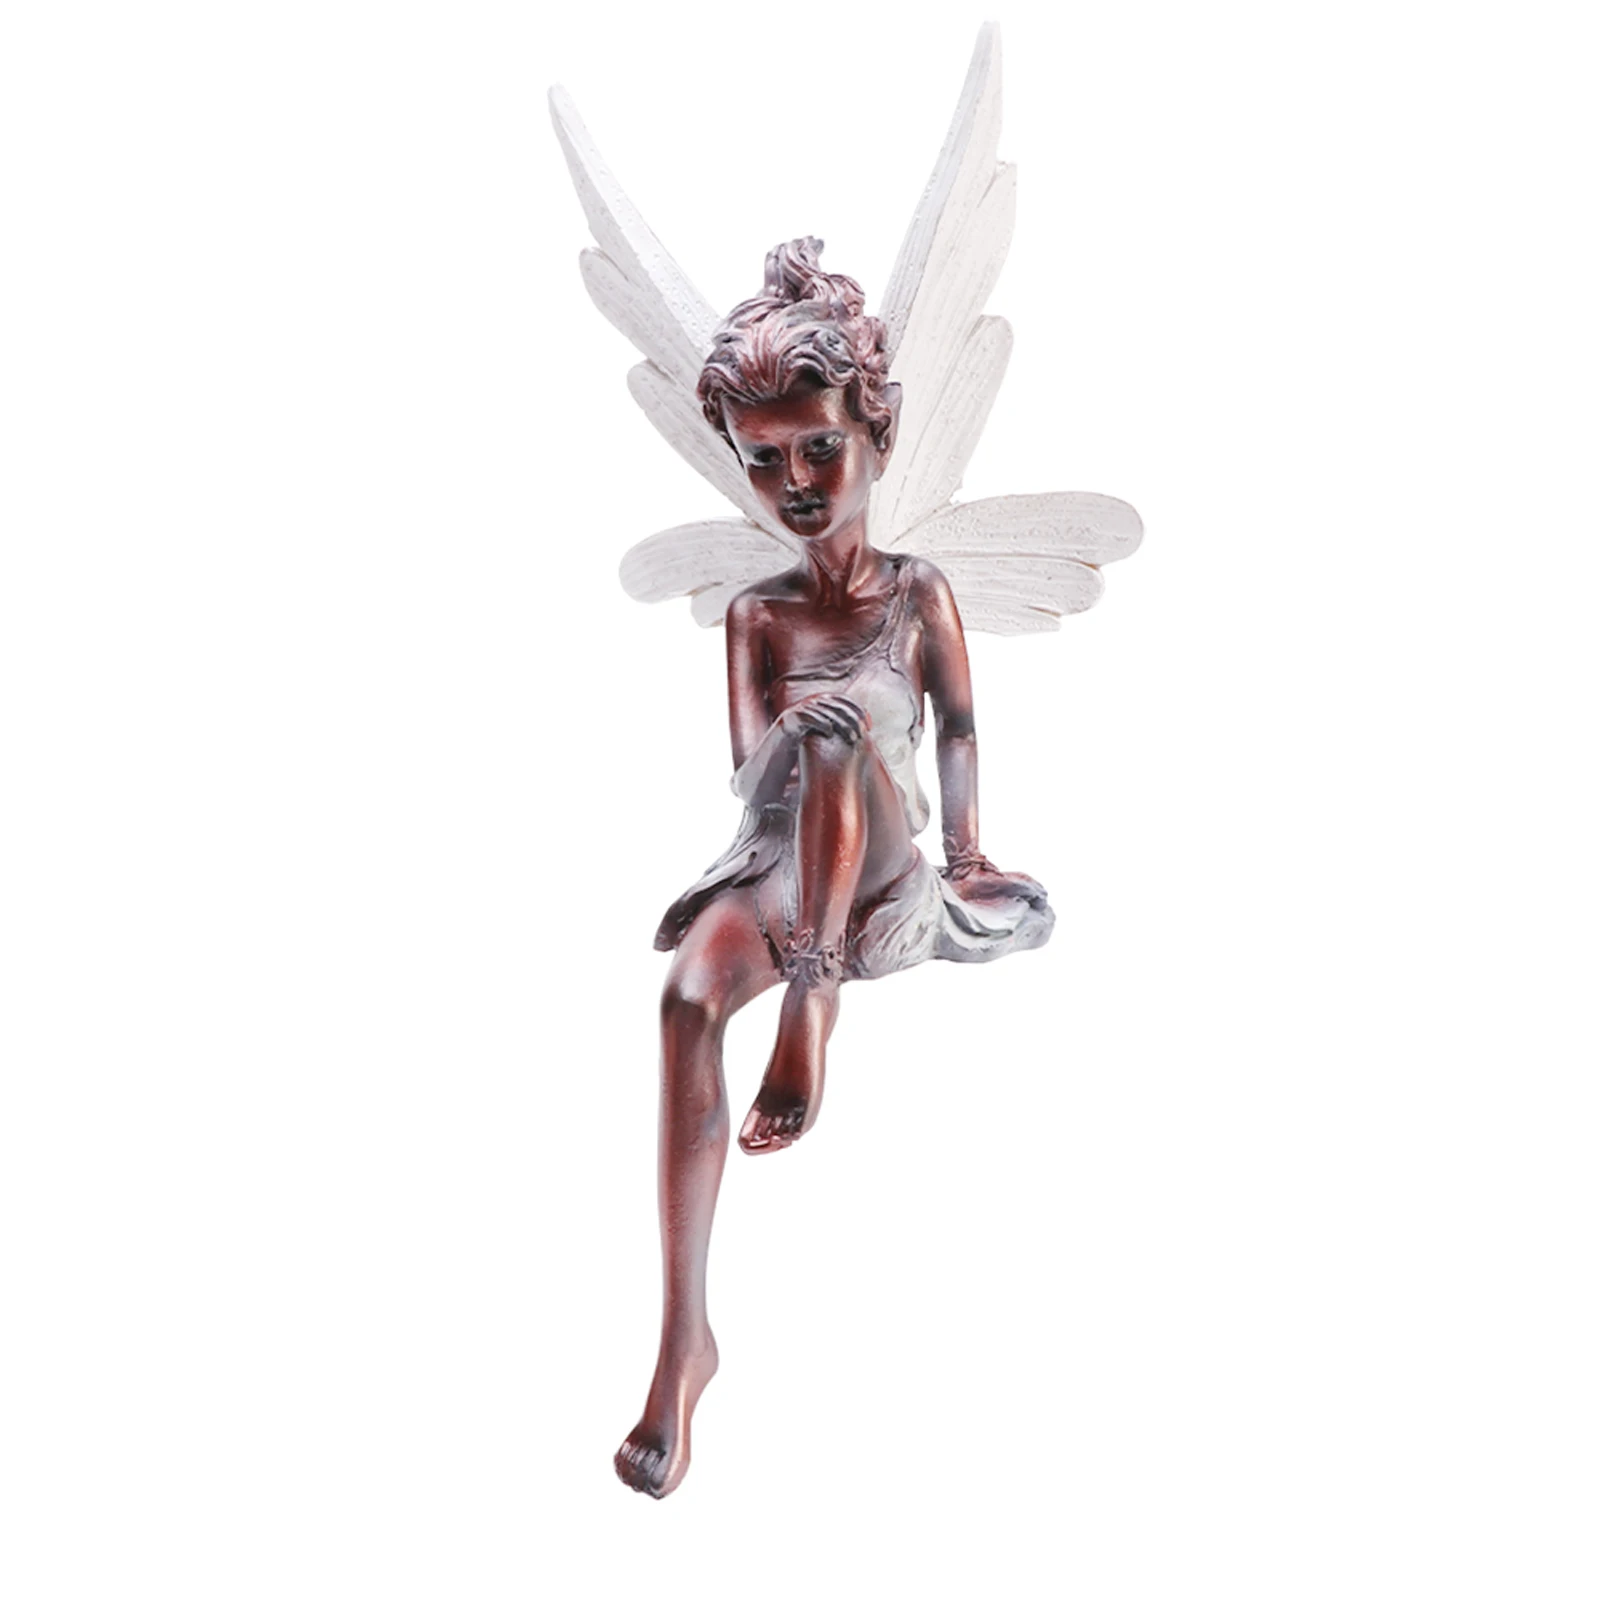 

With Wings Modern Home Decor Sitting Fairy Statue Lawn Patio Landscaping Garden Ornament Yard Outdoor Sculpture Resin Craft Park